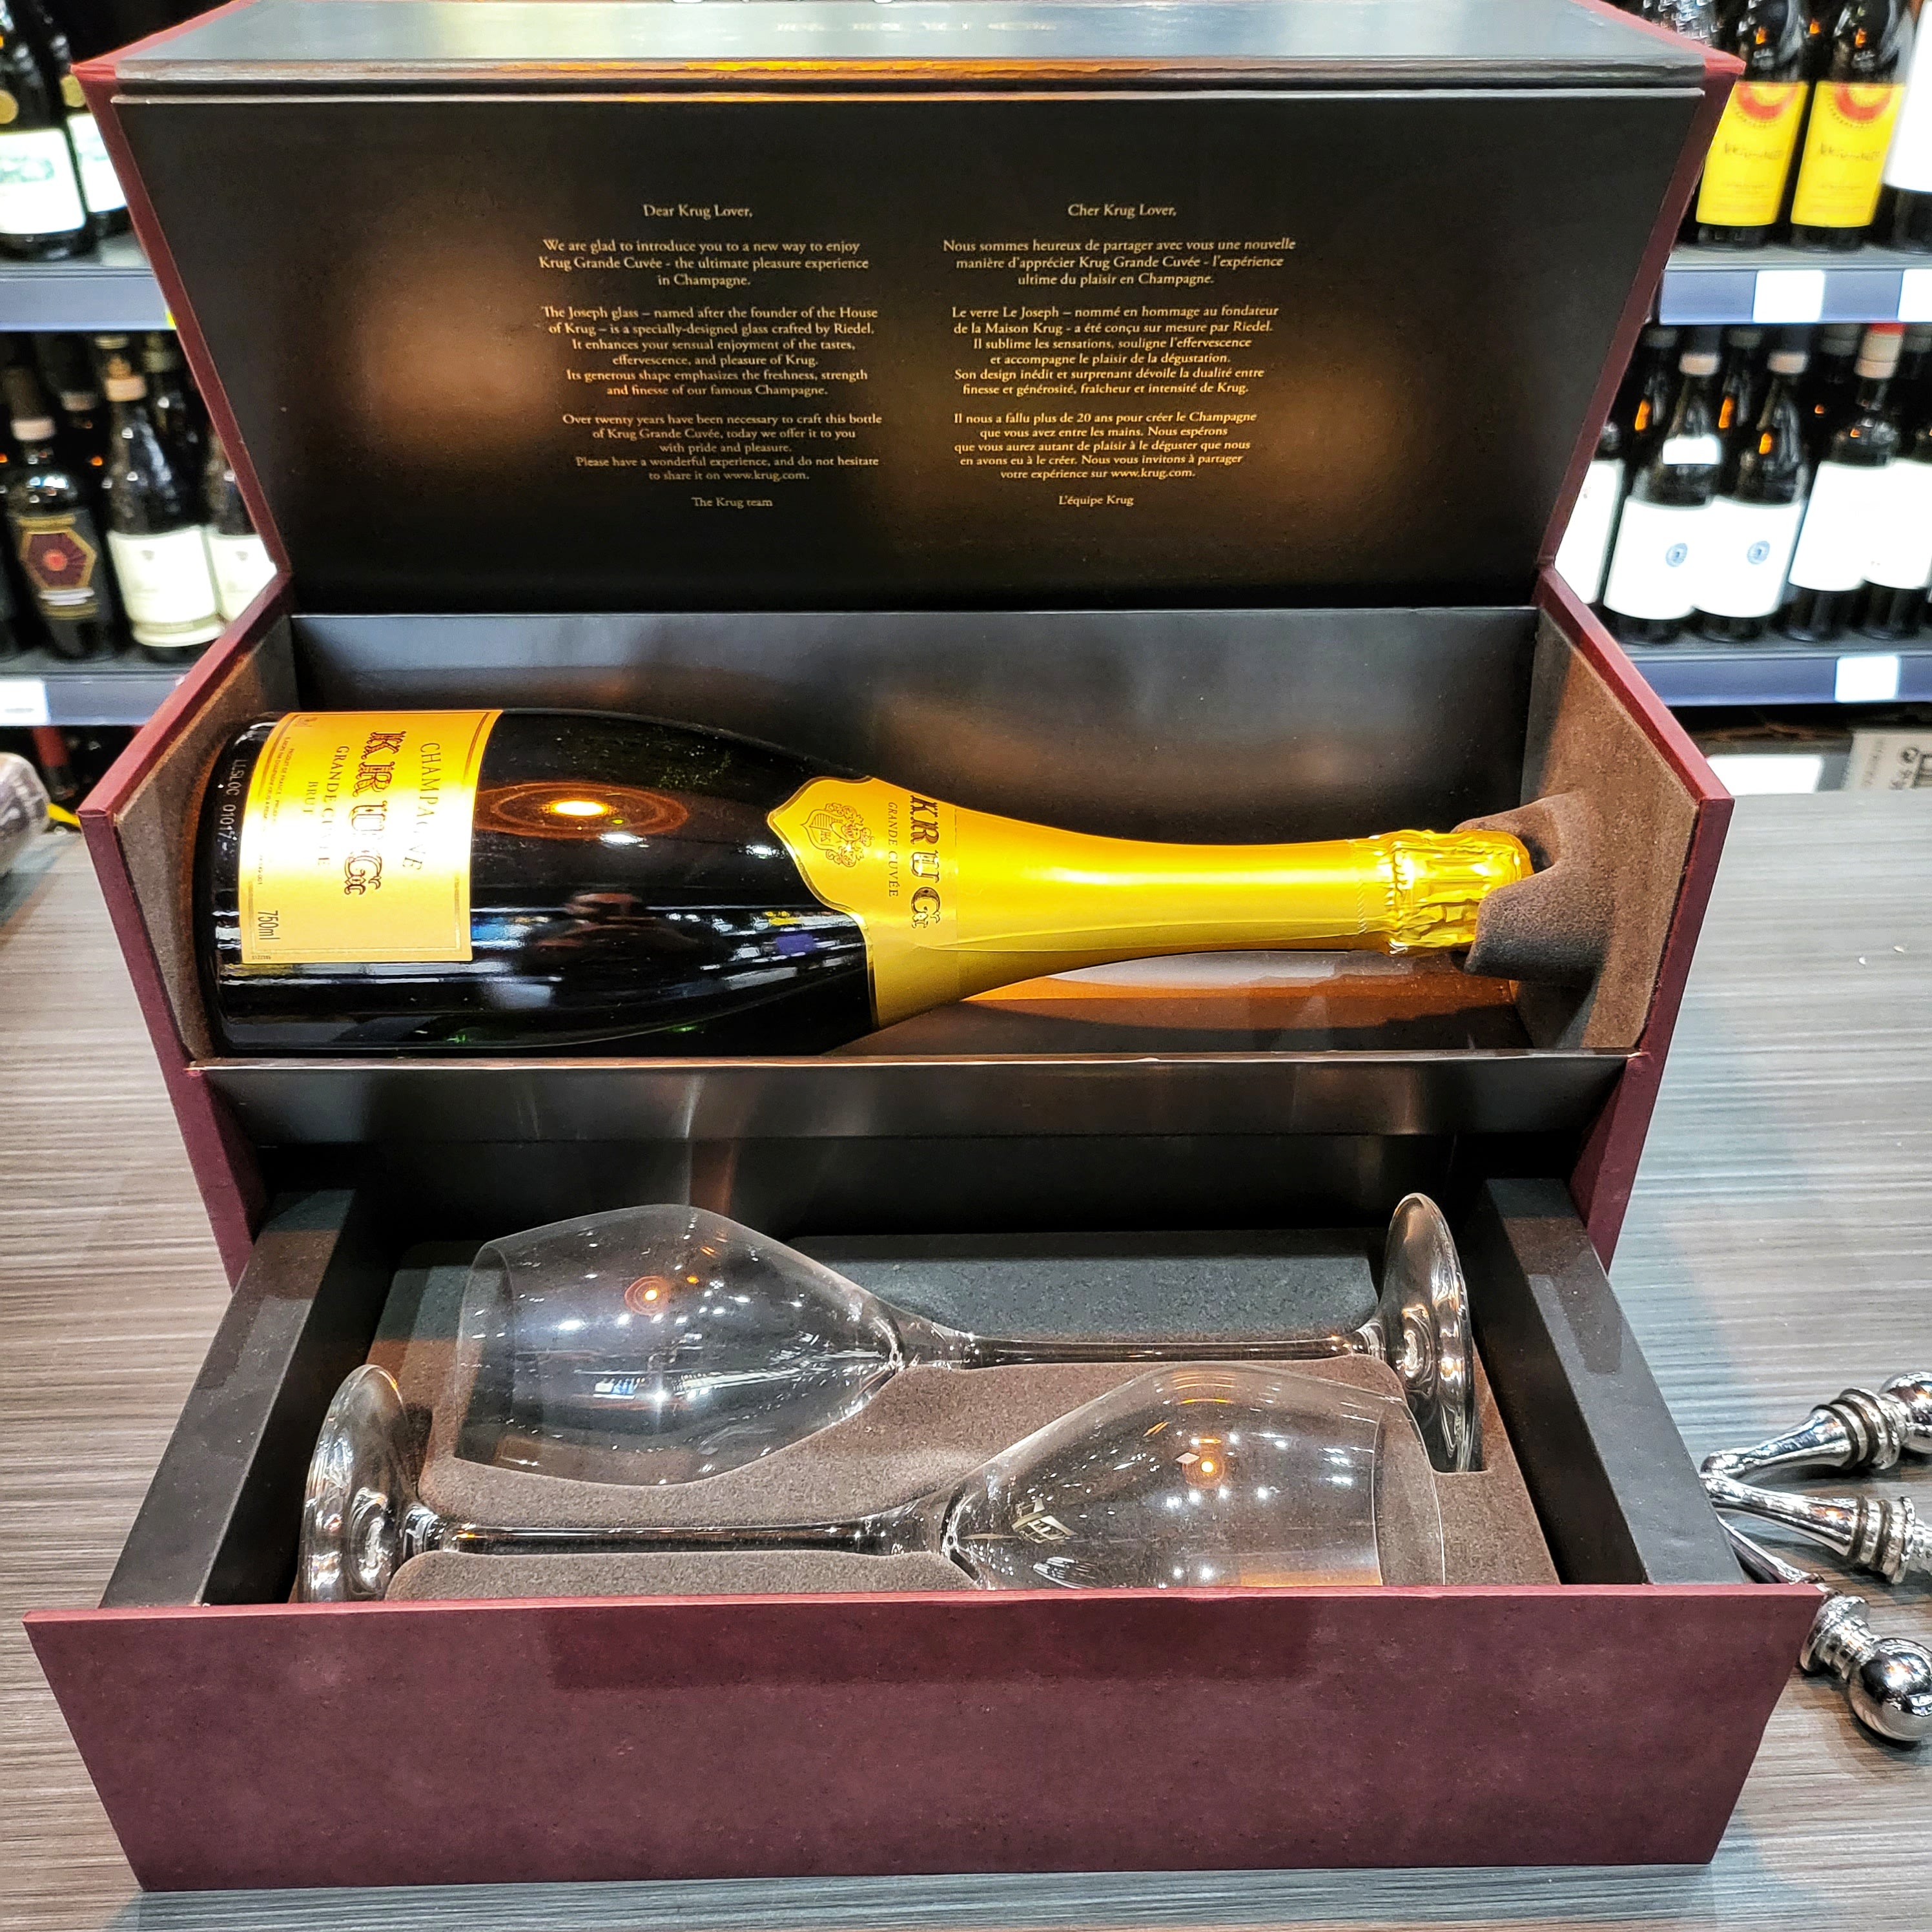 Krug Grande Cuvee Champagne Gift Box, Next Day Delivery